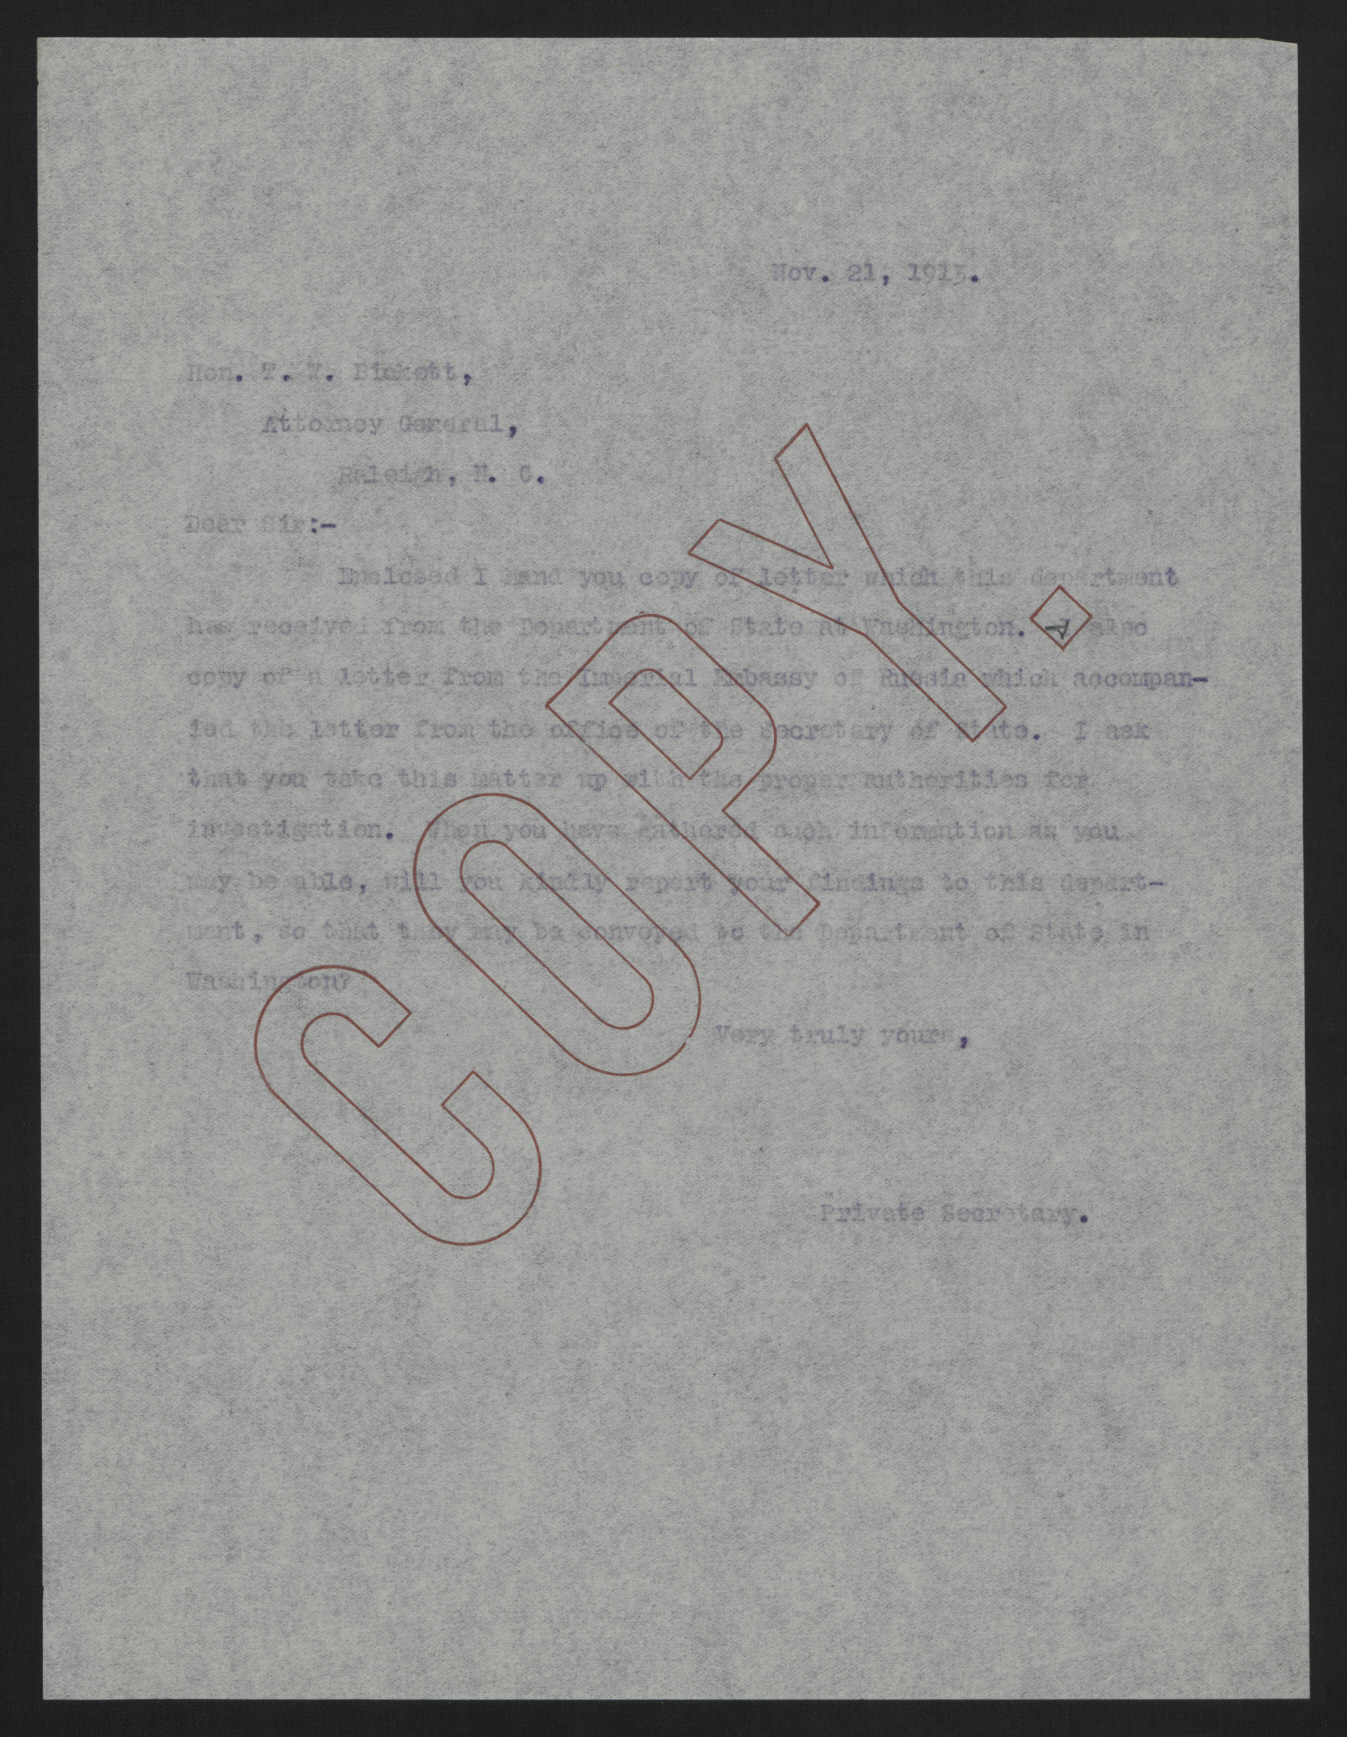 Letter from Kerr to Bickett, November 21, 1913